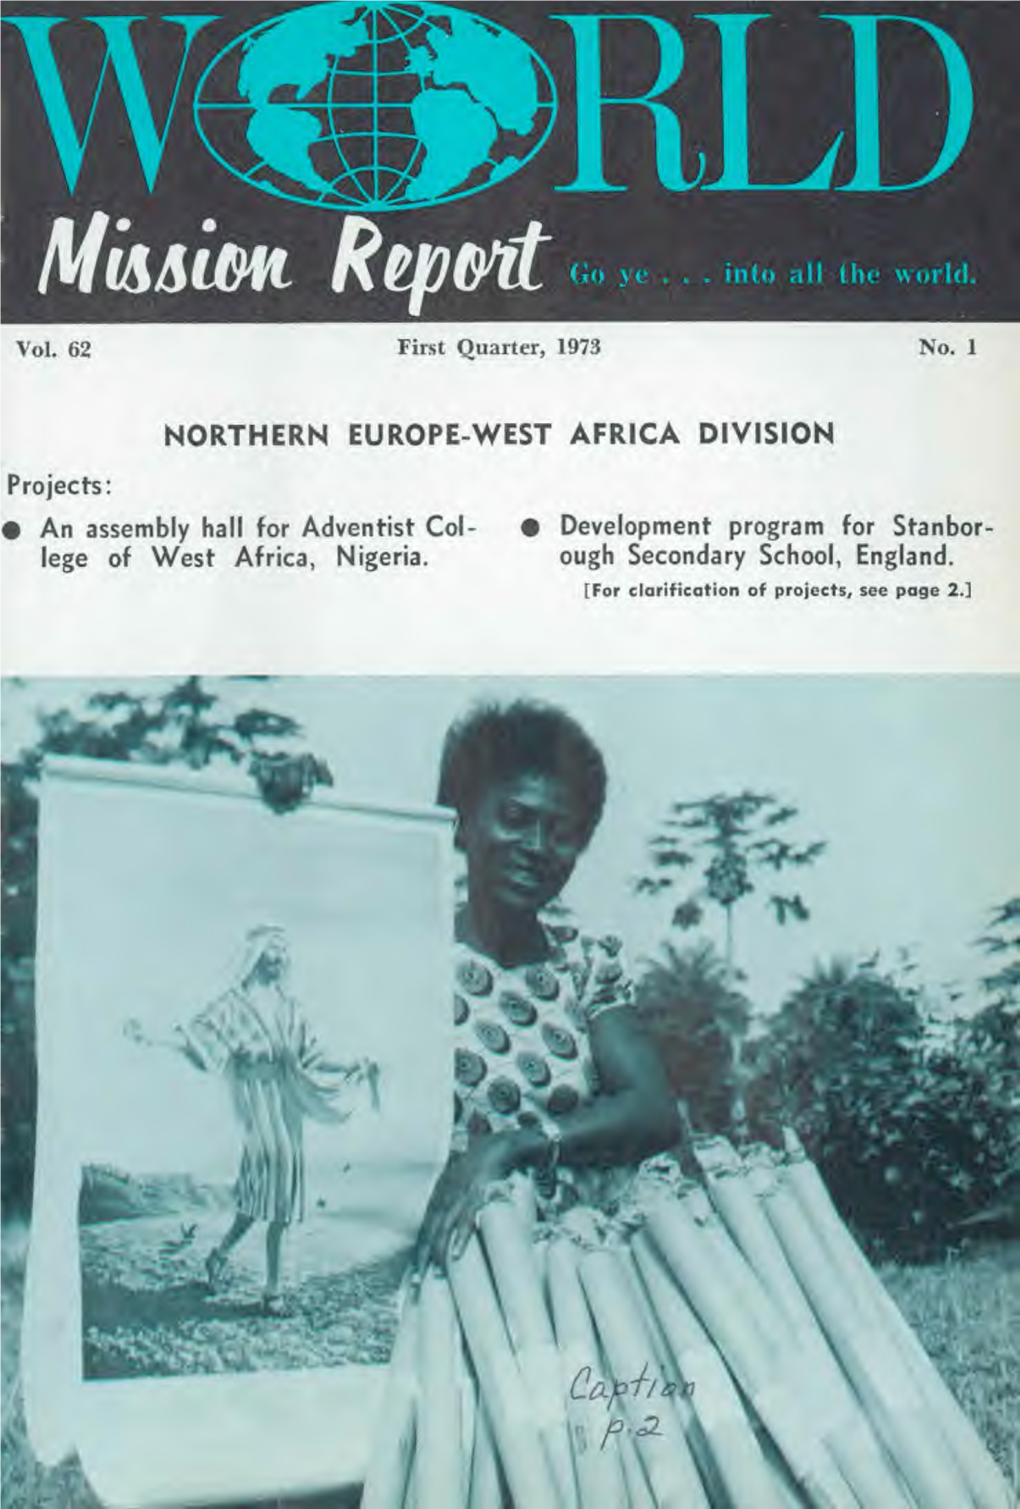 Northern Europe-West Africa Division